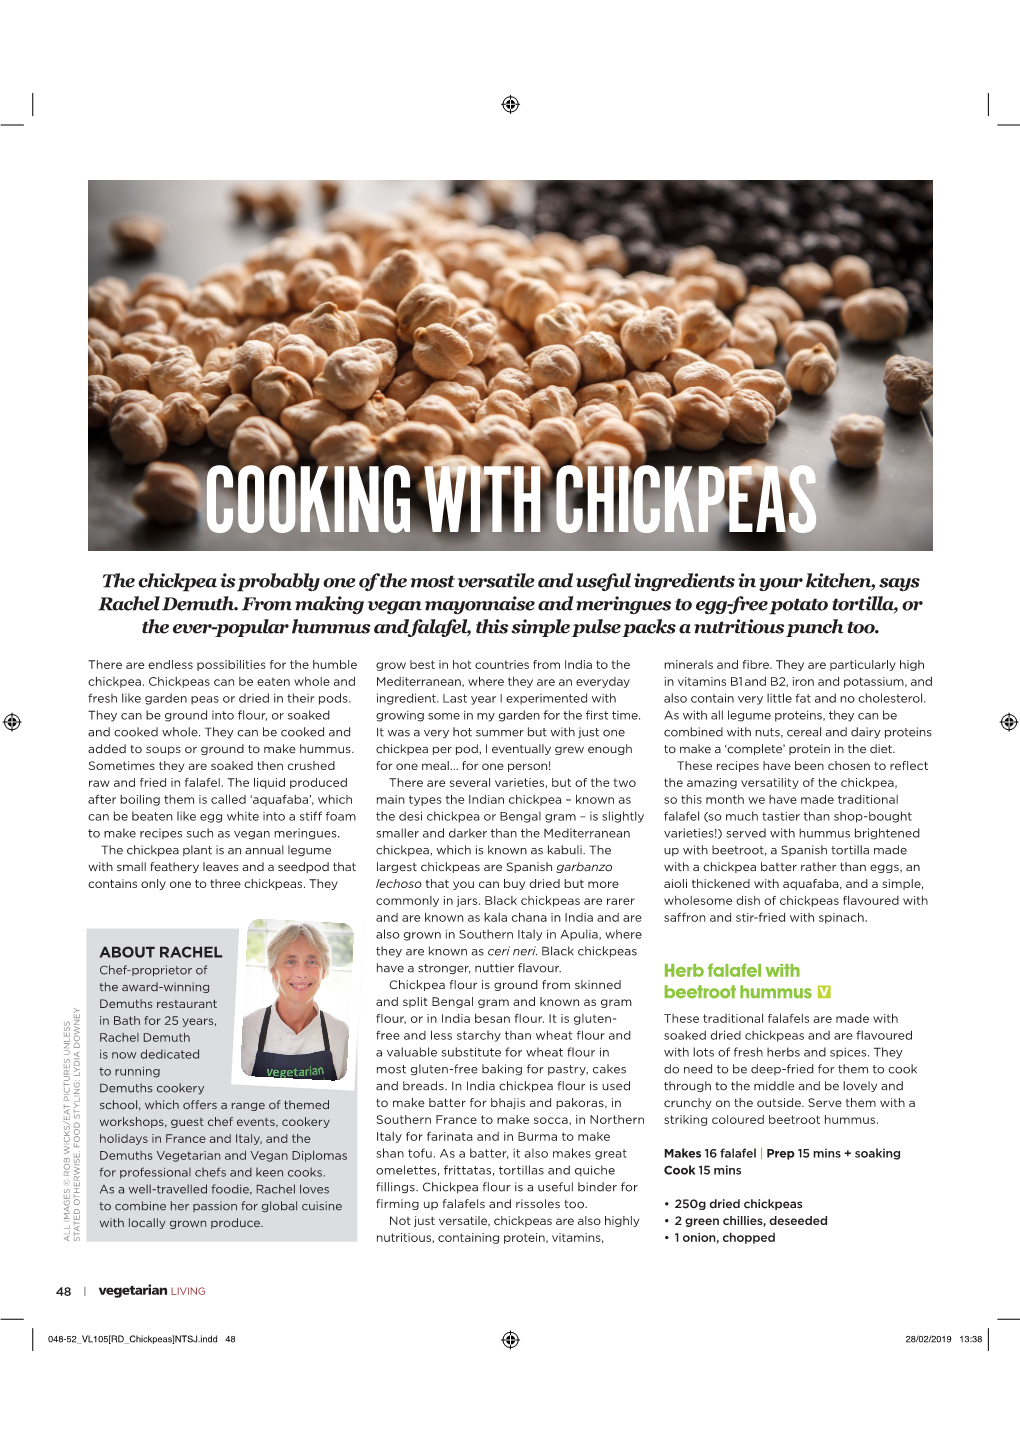 Cooking with Chickpeas